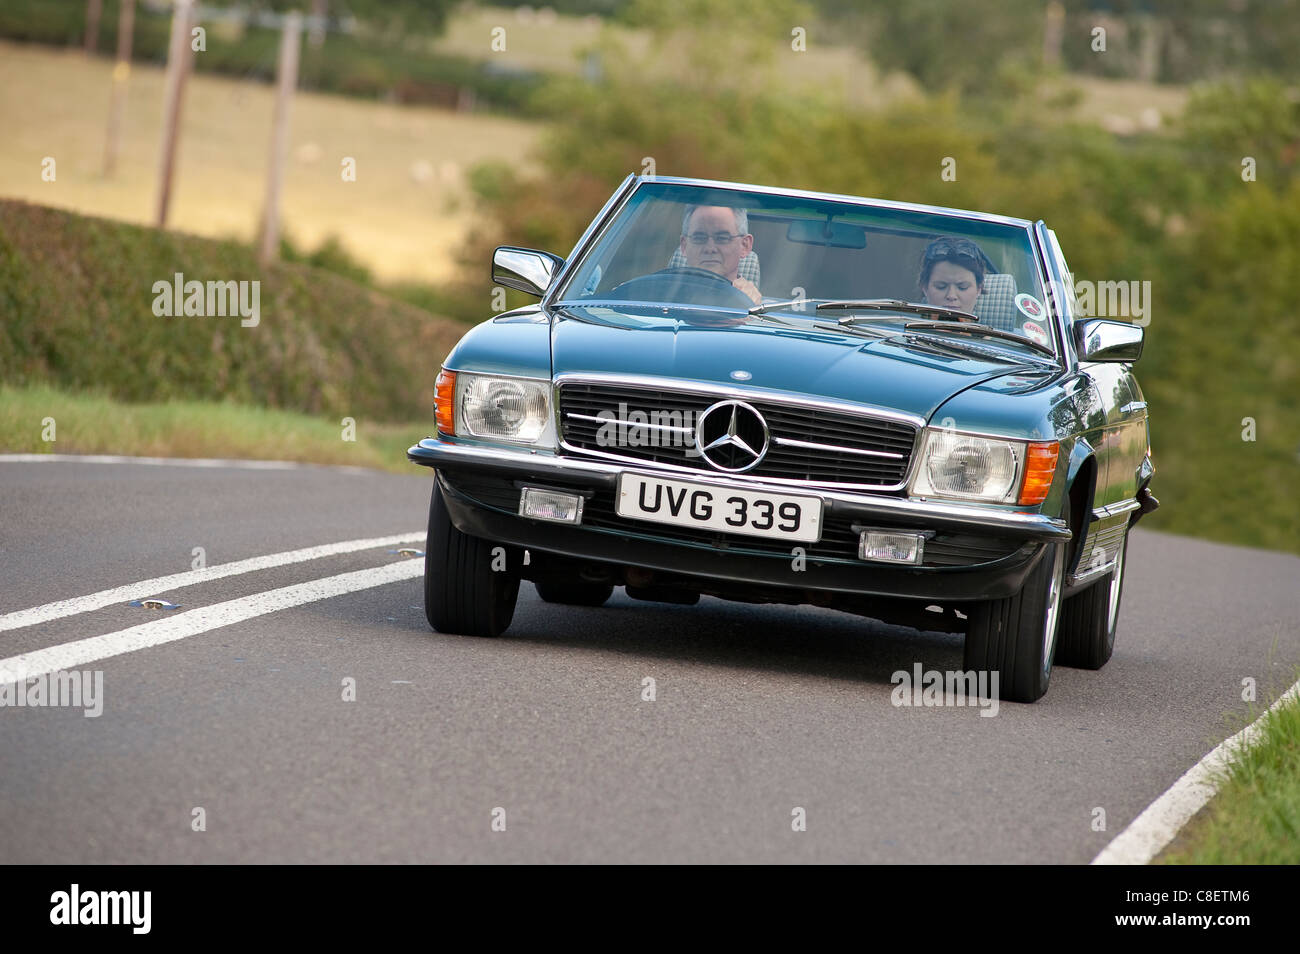 Classic 1980's Mercedes Benz 280SL car being driven on a road in England. Stock Photo